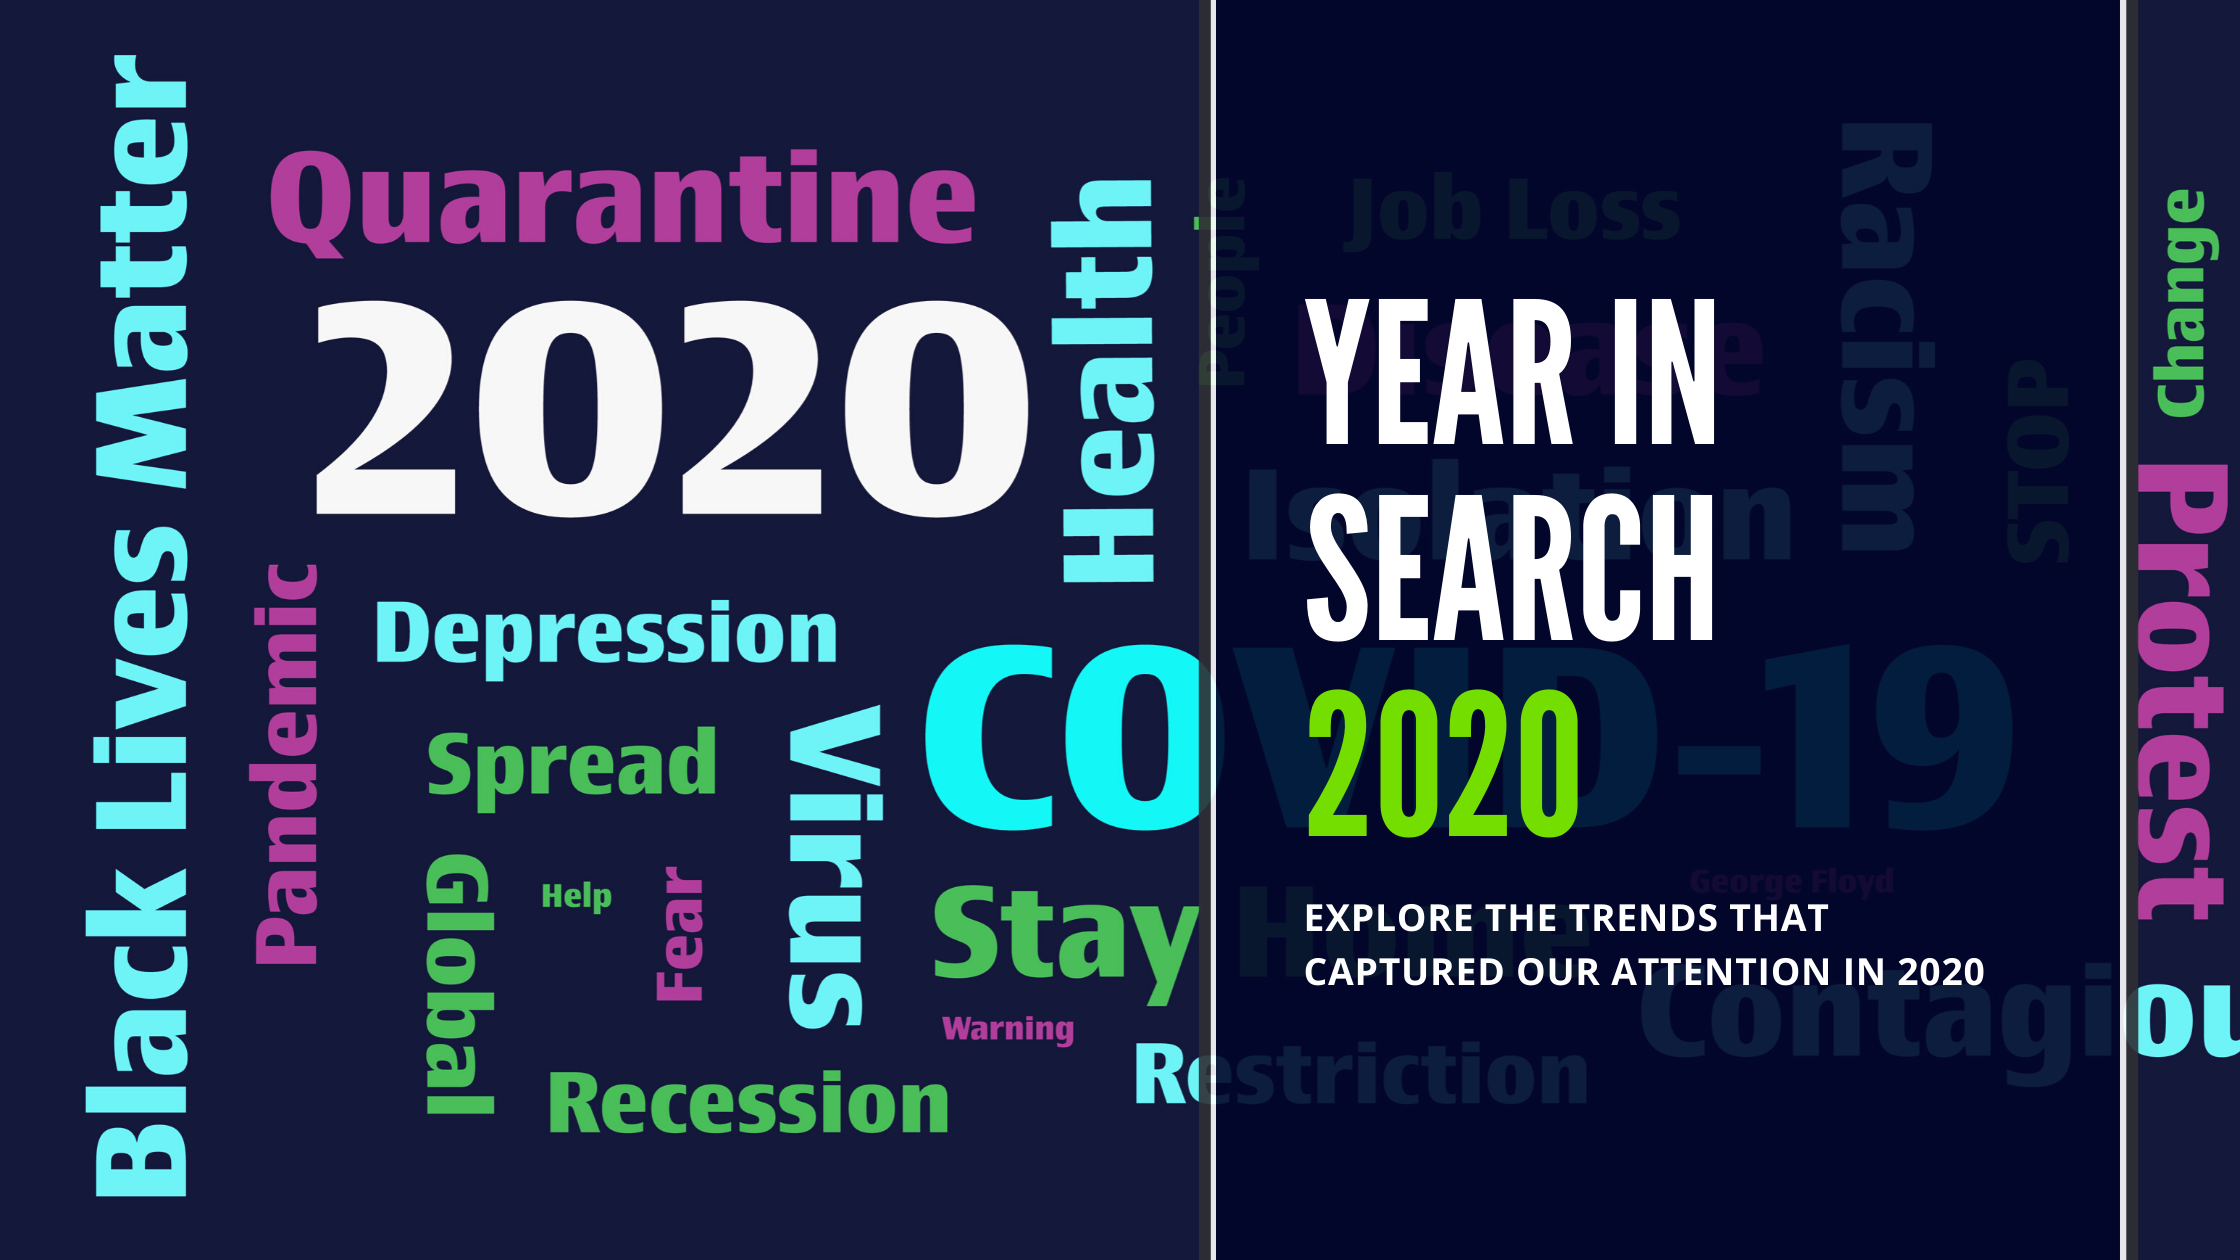 A word collage for the historical year of 2020 like none other. COVID-19 a global pandemic, financial recession and job loss, racial discrimination and protesting for civil rights.